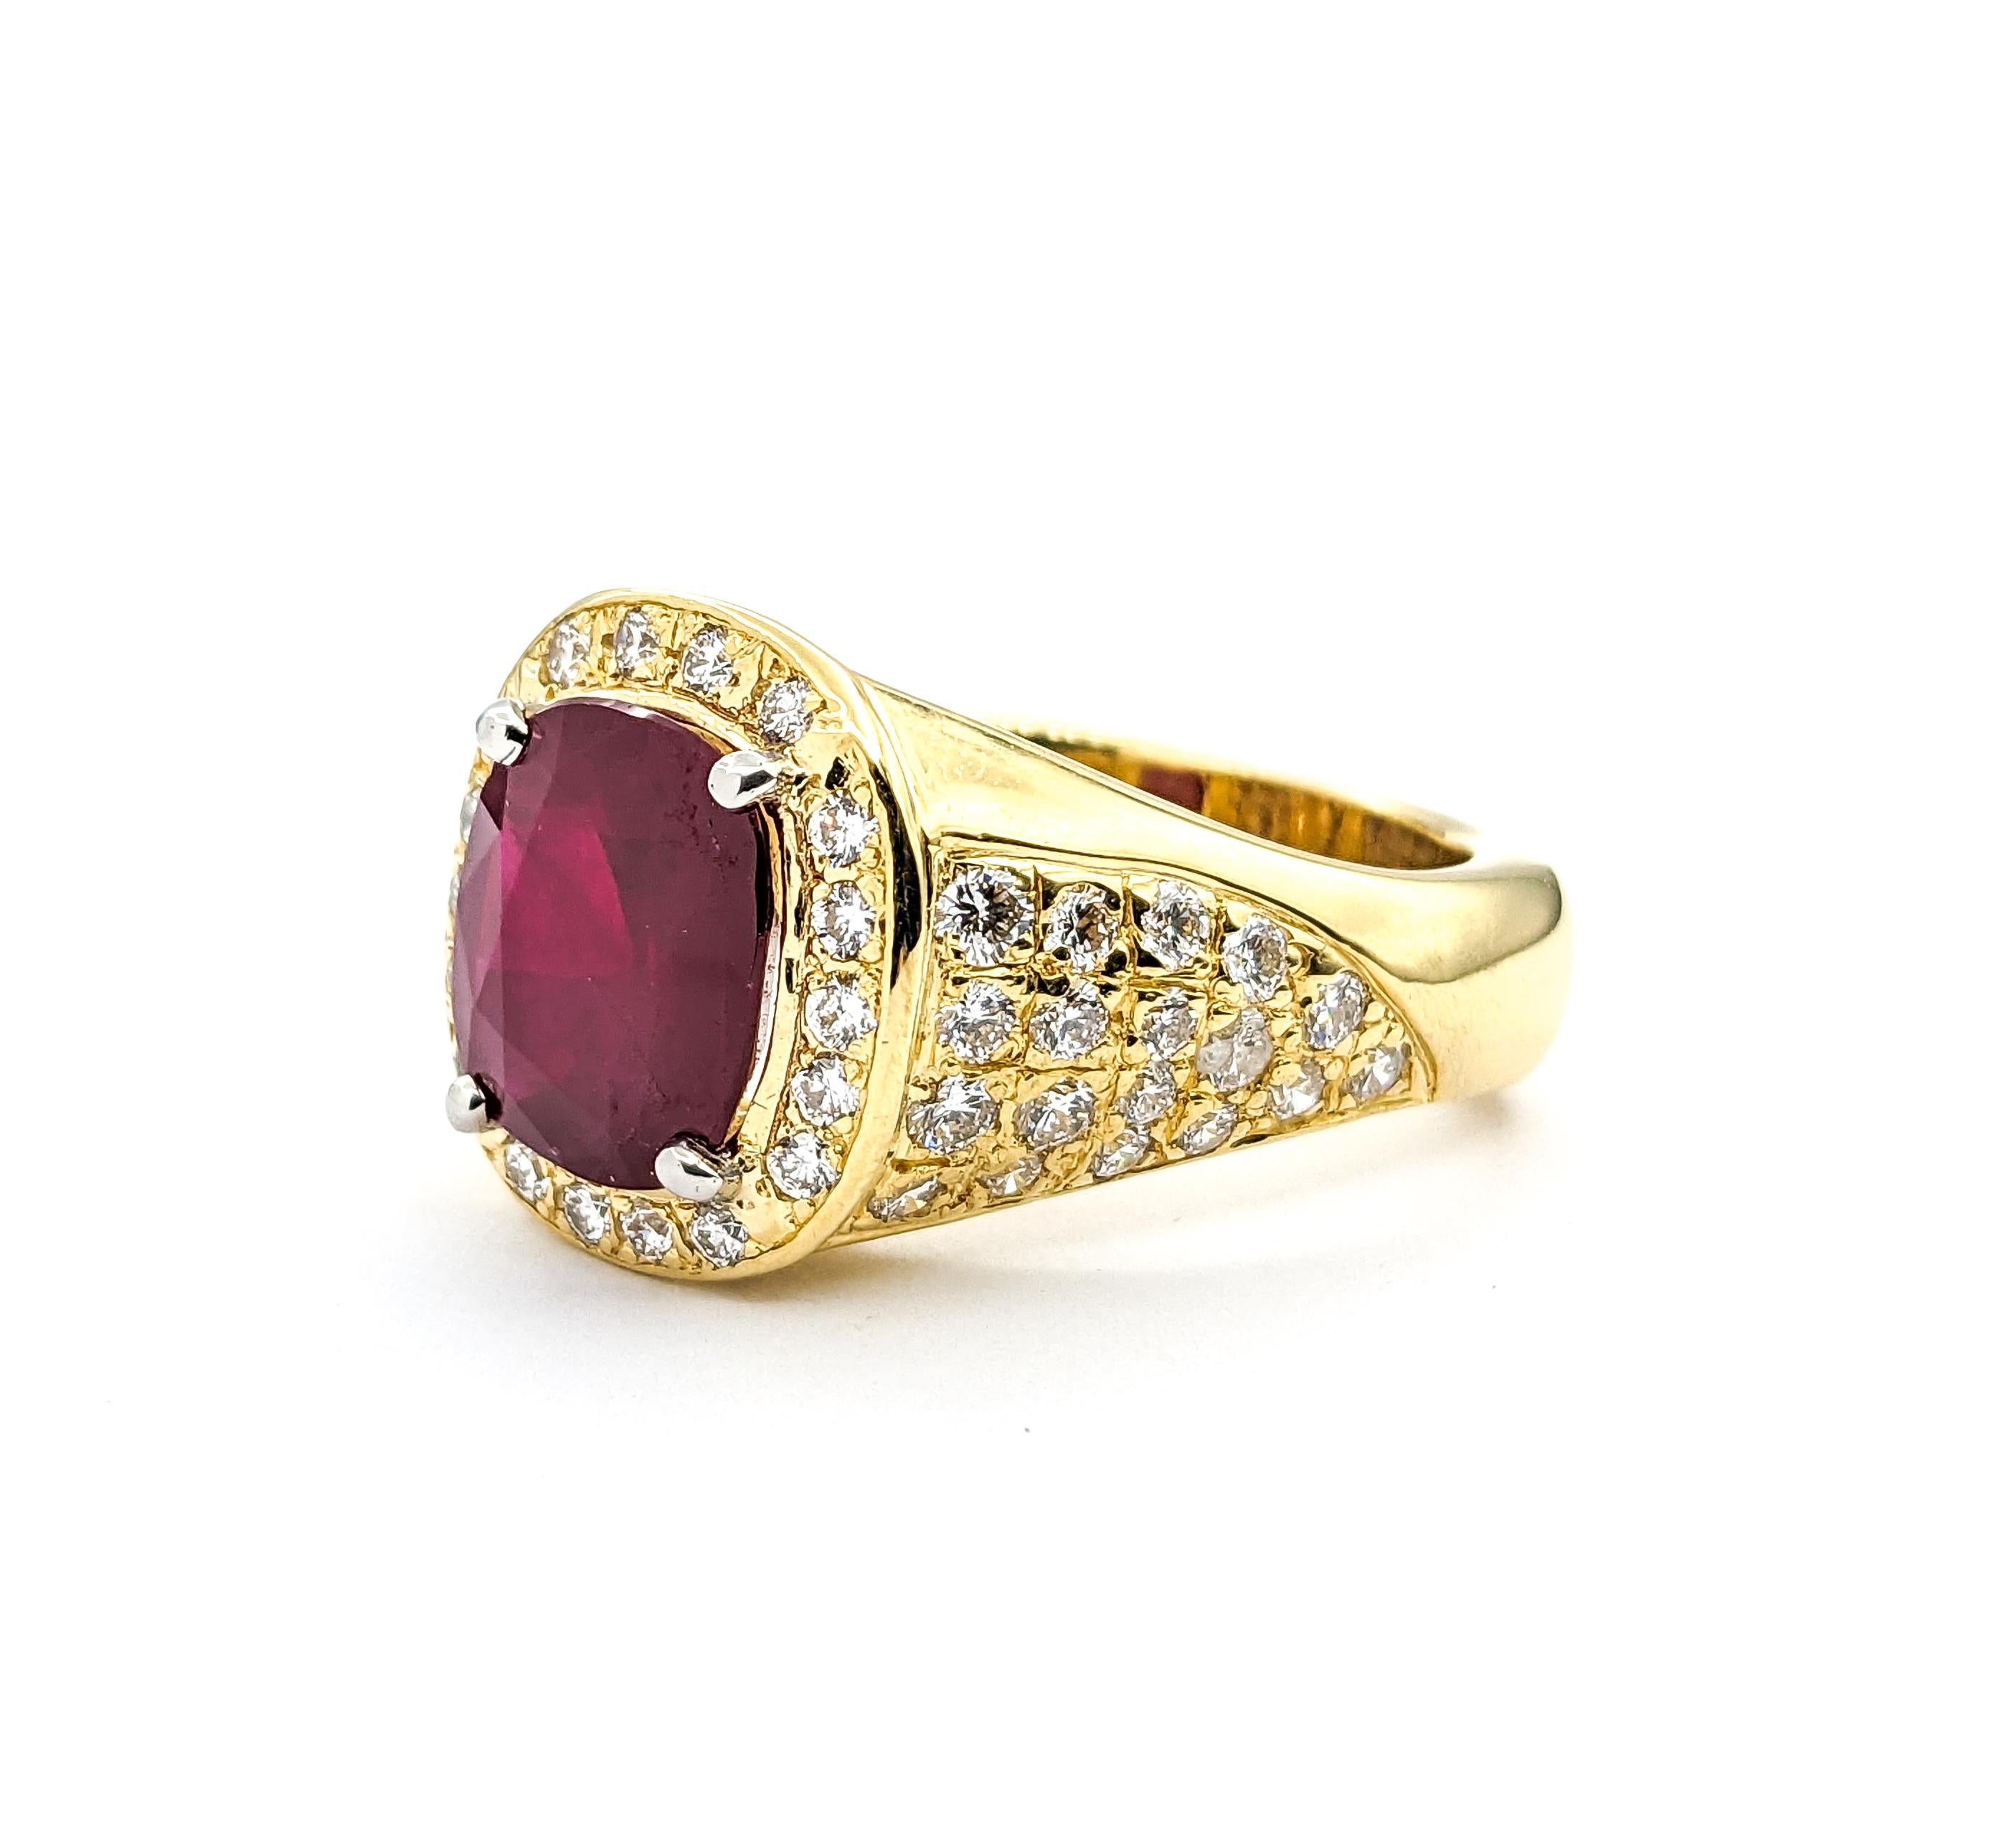 GIA Cerified 5.87ct Heat-only Burmese Ruby & 1.50ctw Diamonds Ring In Yellow Gol For Sale 6